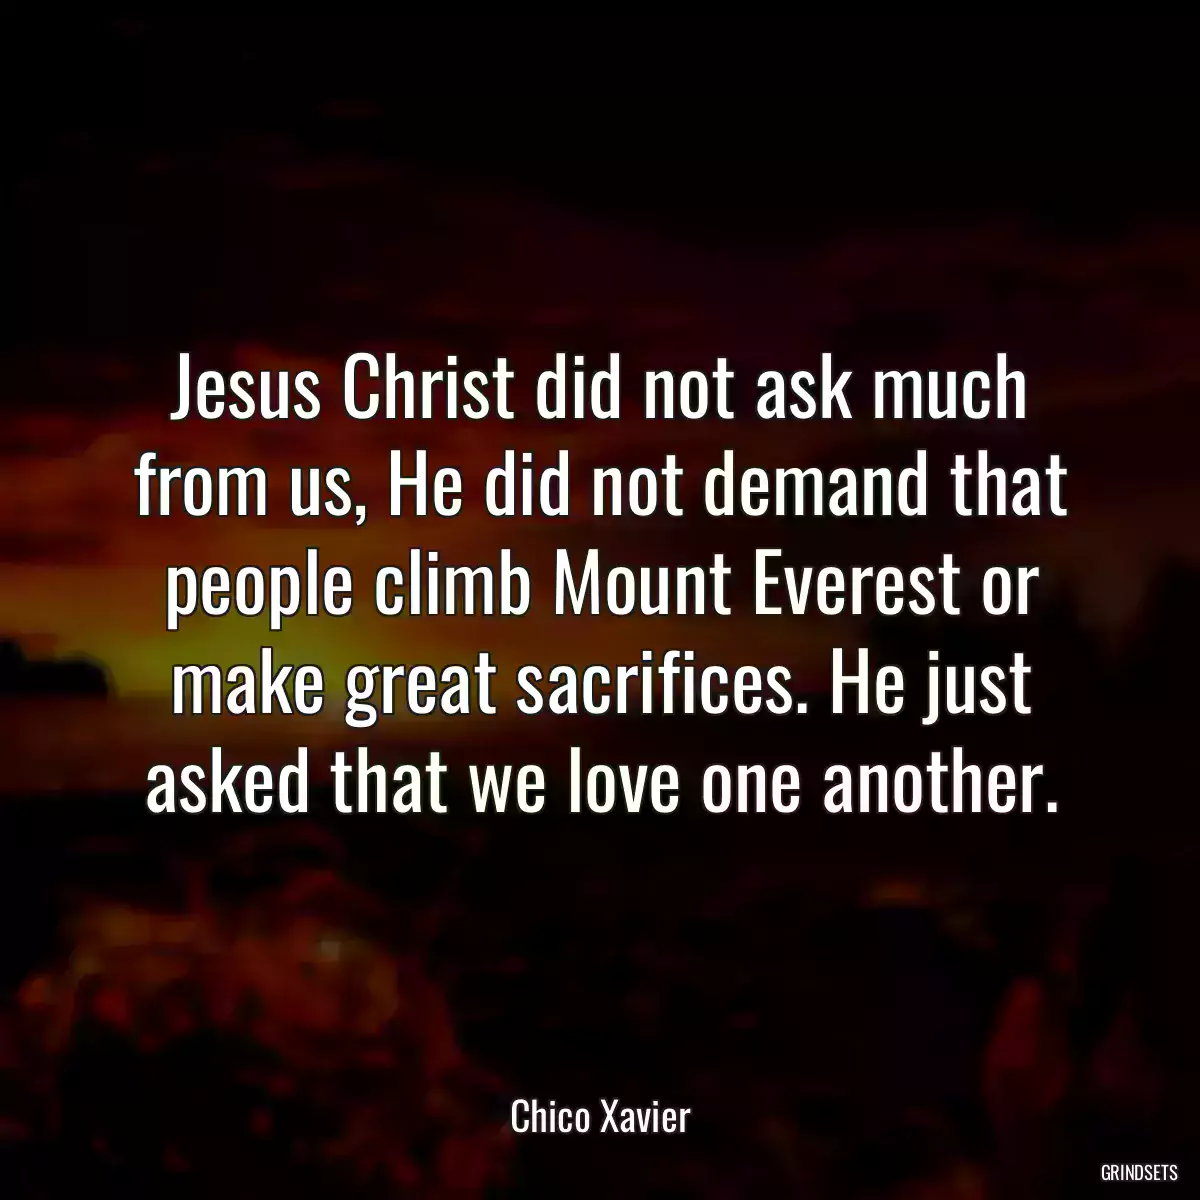 Jesus Christ did not ask much from us, He did not demand that people climb Mount Everest or make great sacrifices. He just asked that we love one another.